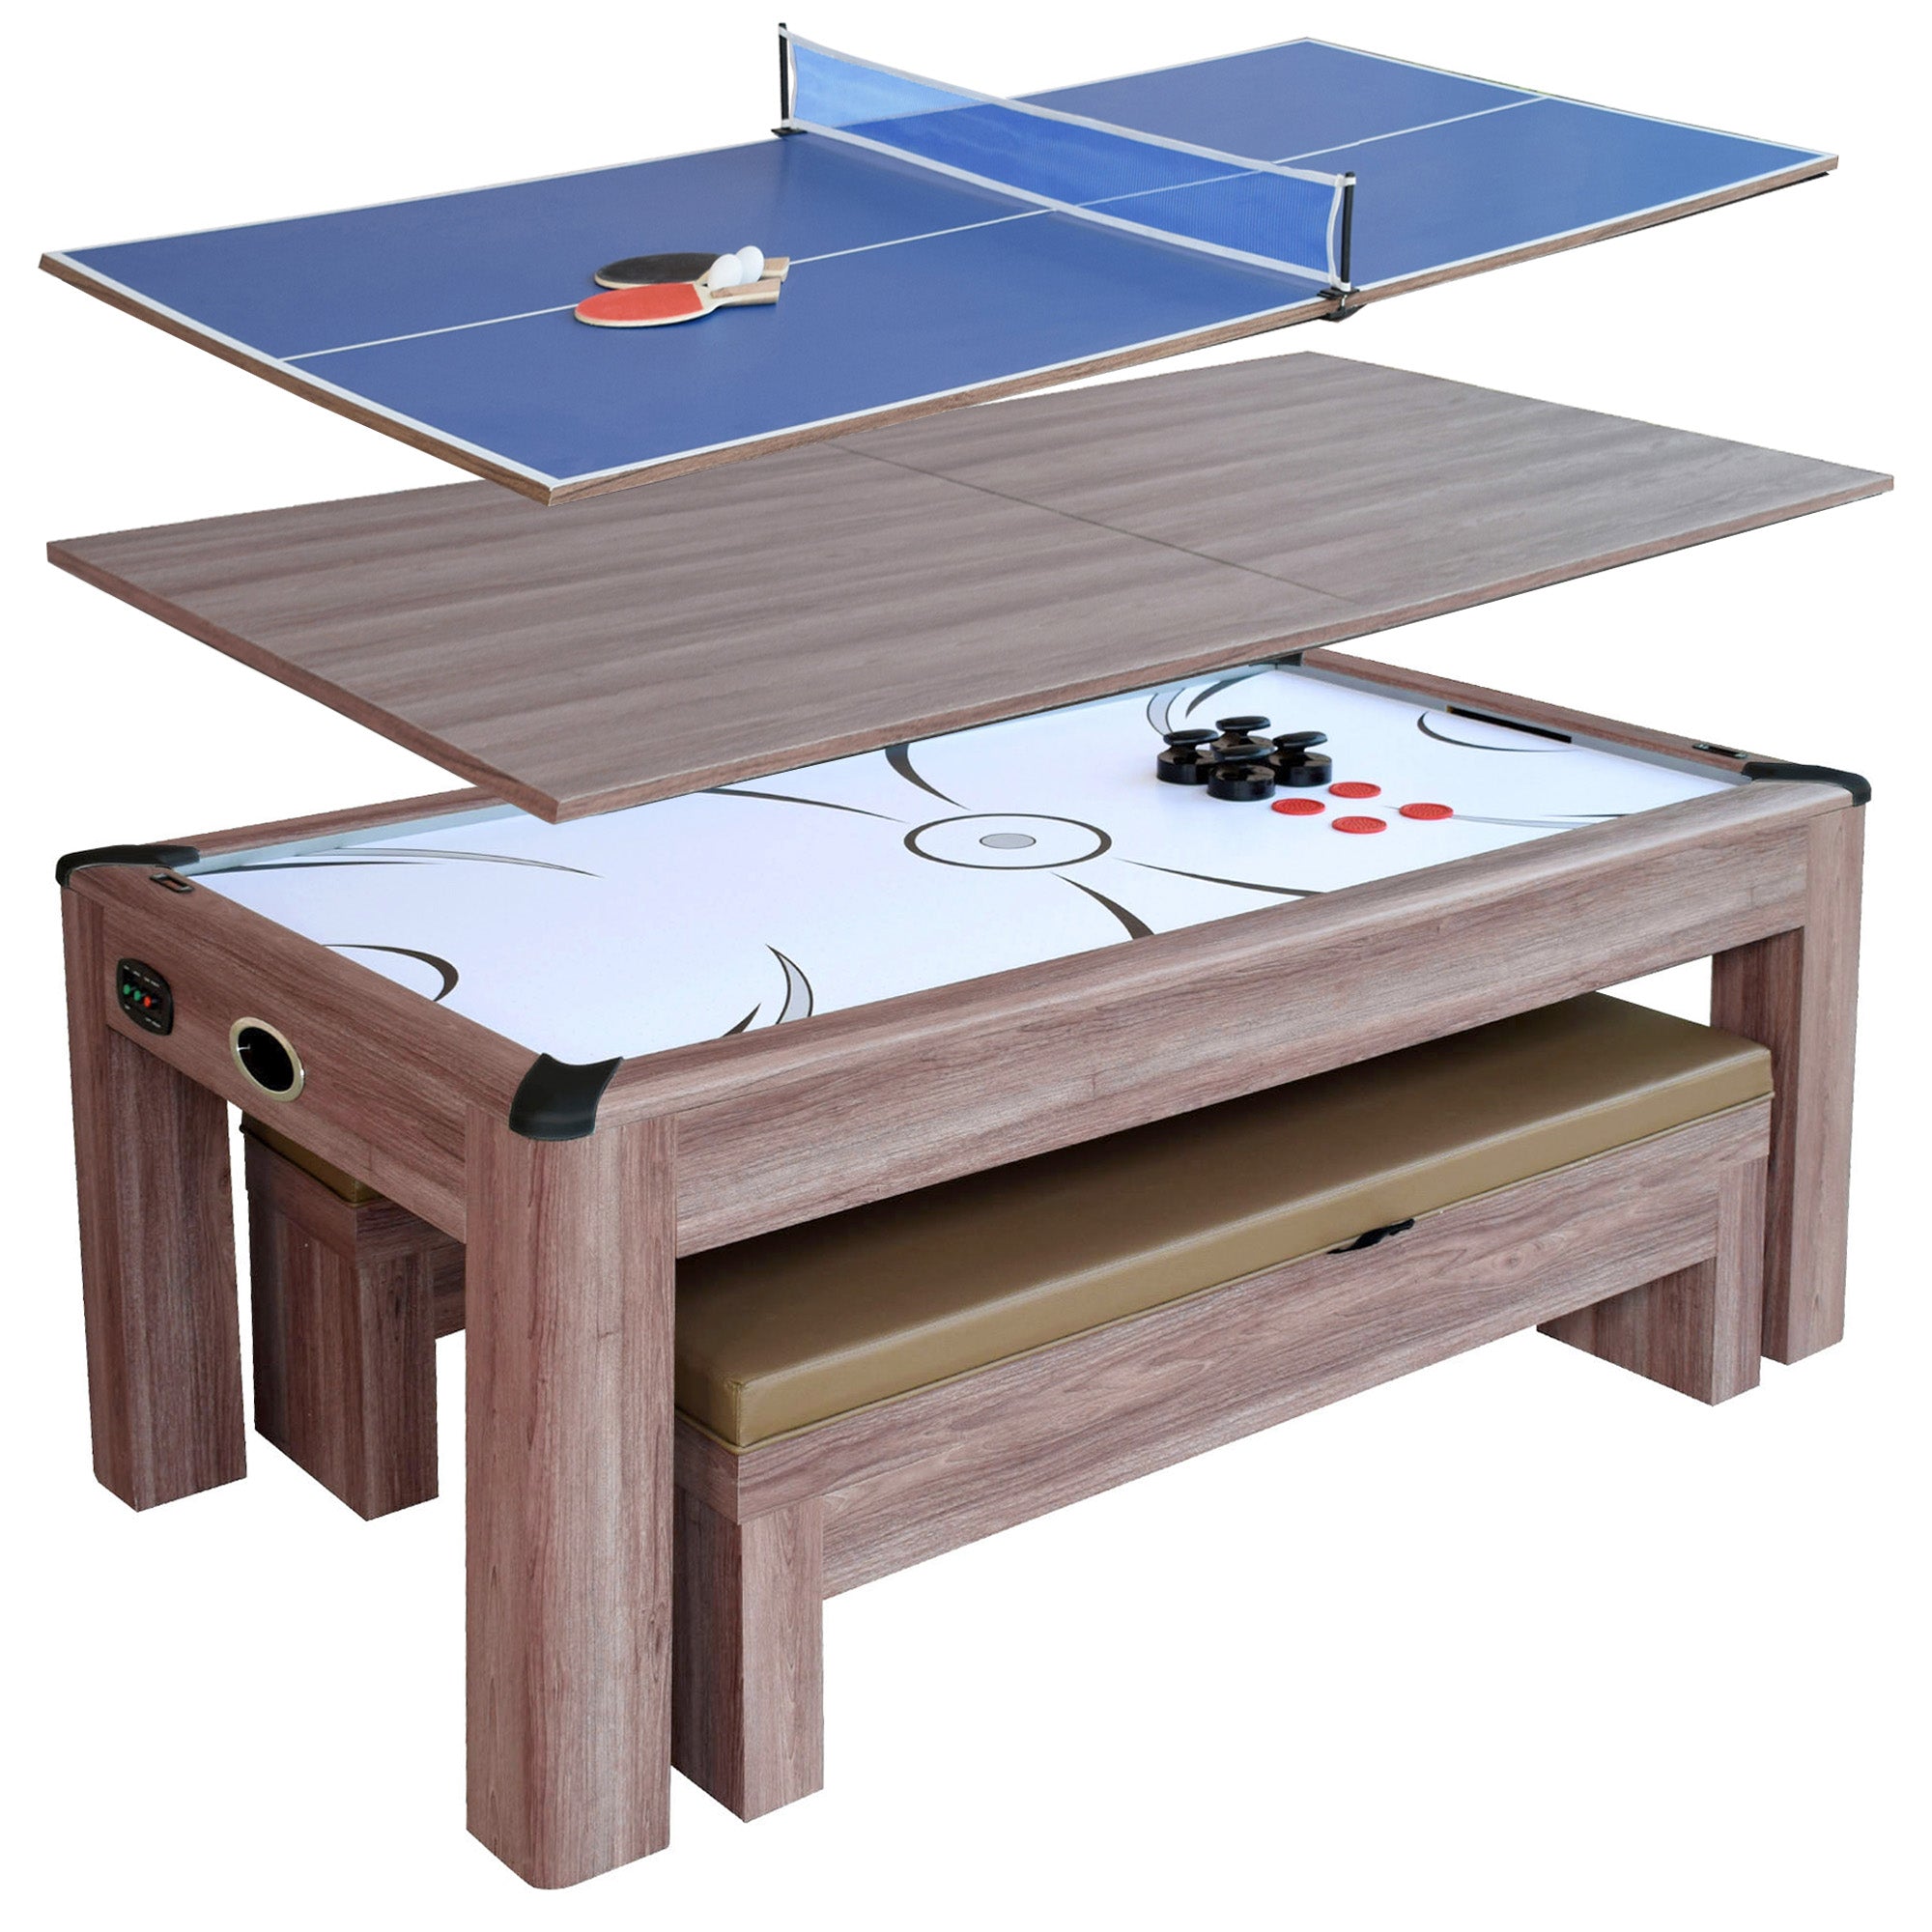 Driftwood 7 Foot Air Hockey Table Combo Set with Benches